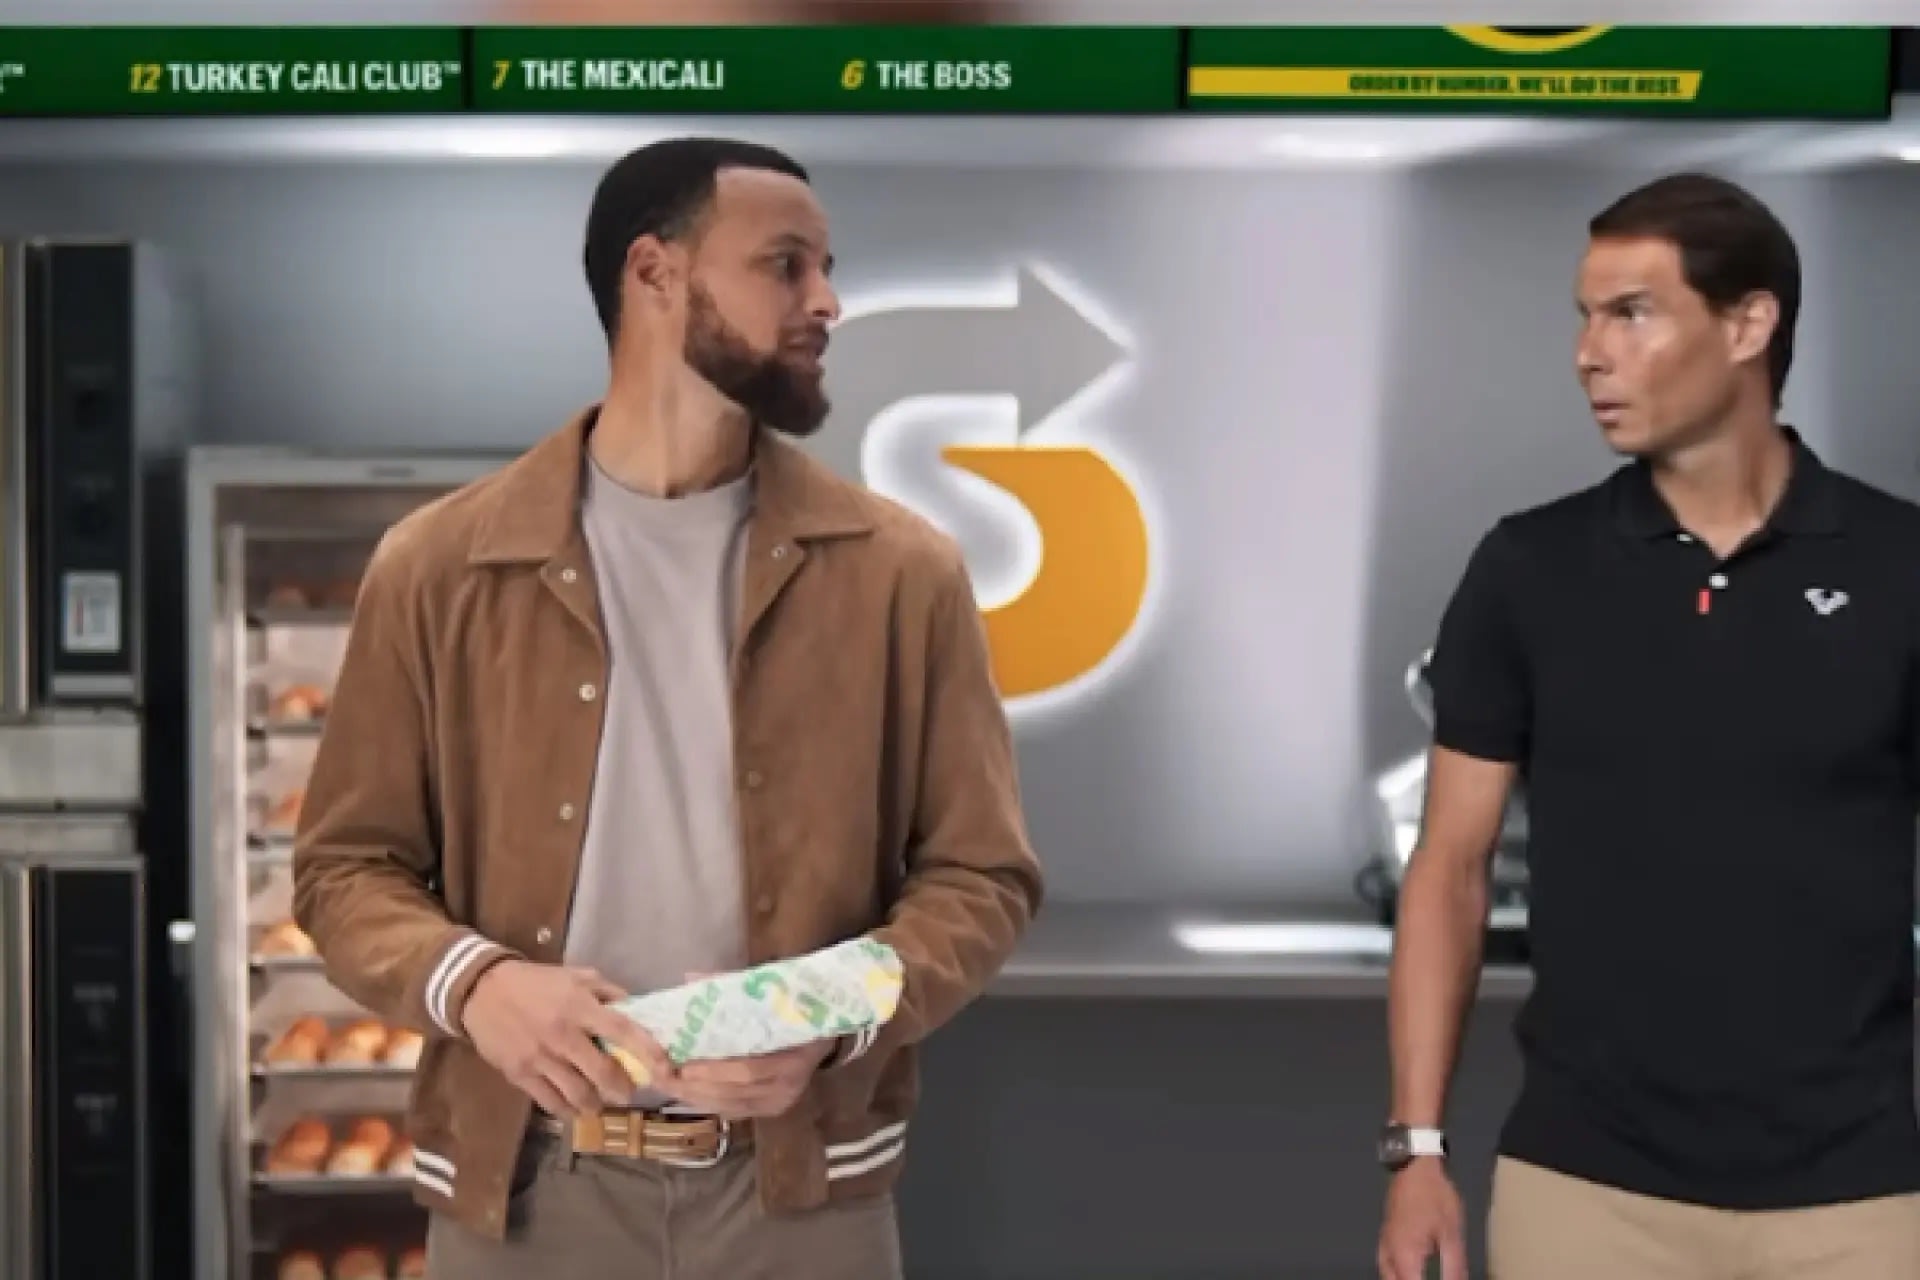 Grand Ham! Rafael Nadal joins Steph Curry in new Subway sandwich ad